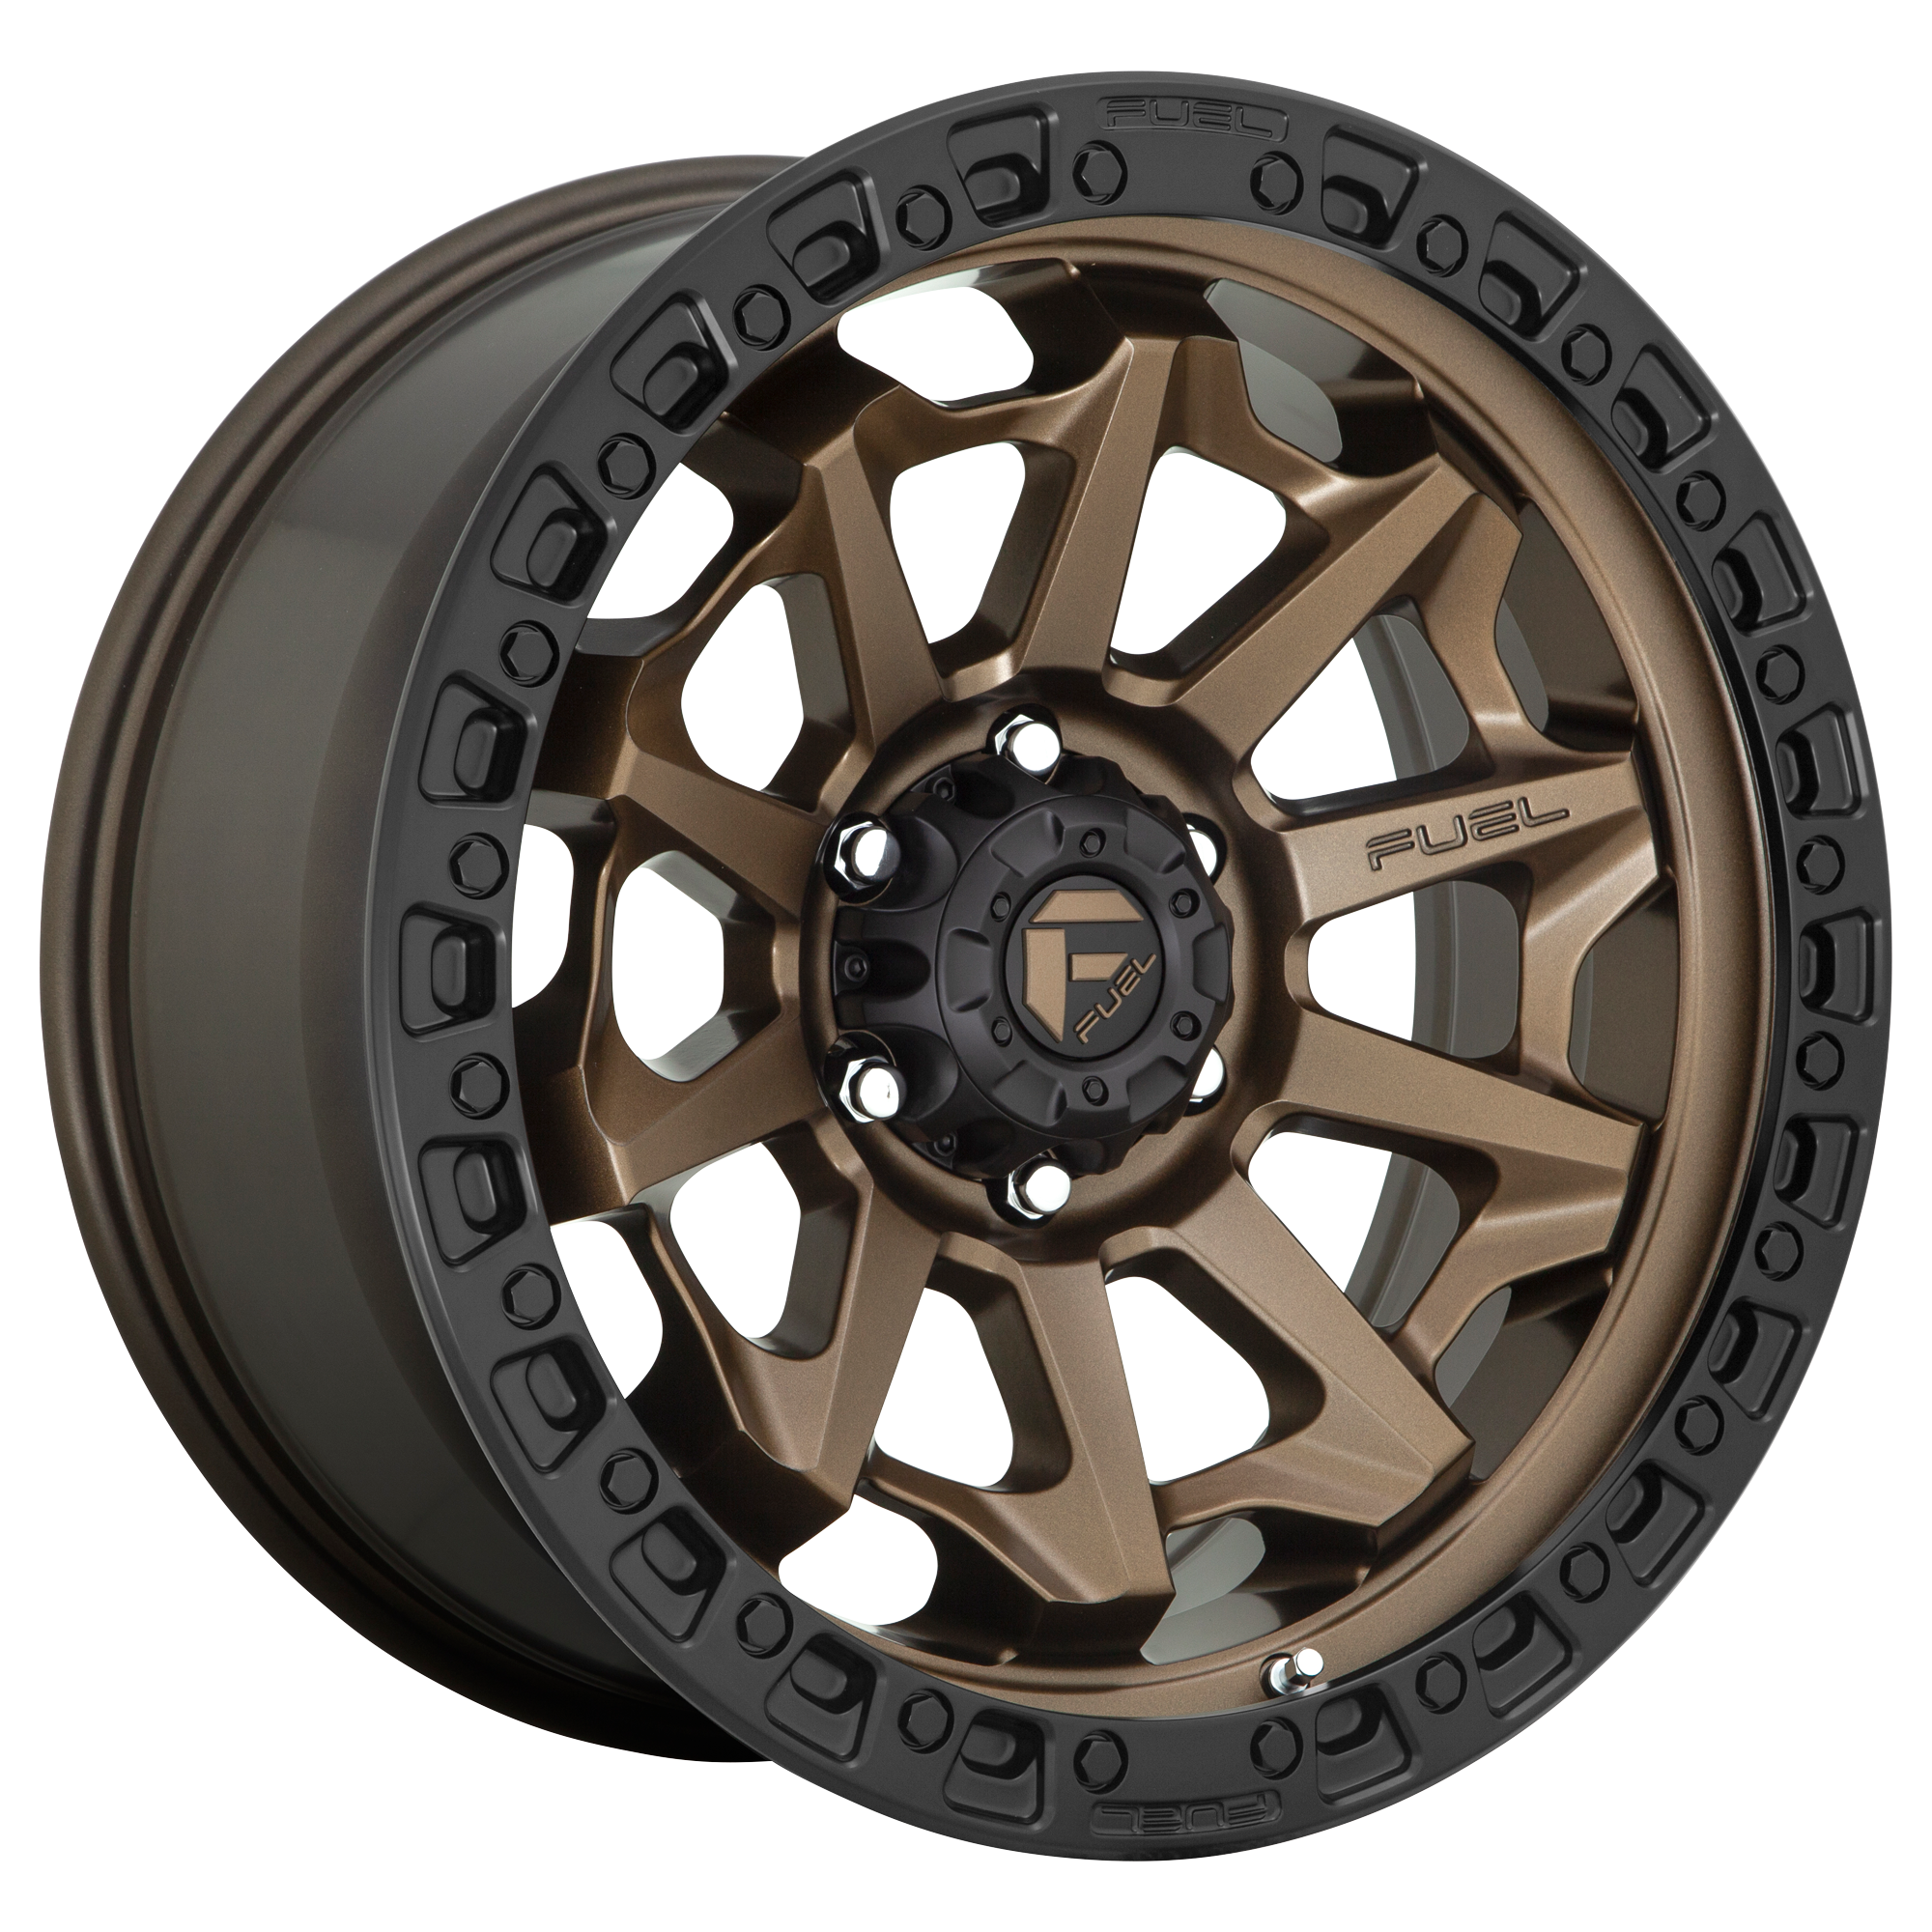 COVERT 20x9 8x180.00 MATTE BRONZE BLACK BEAD RING (1 mm) - Tires and Engine Performance